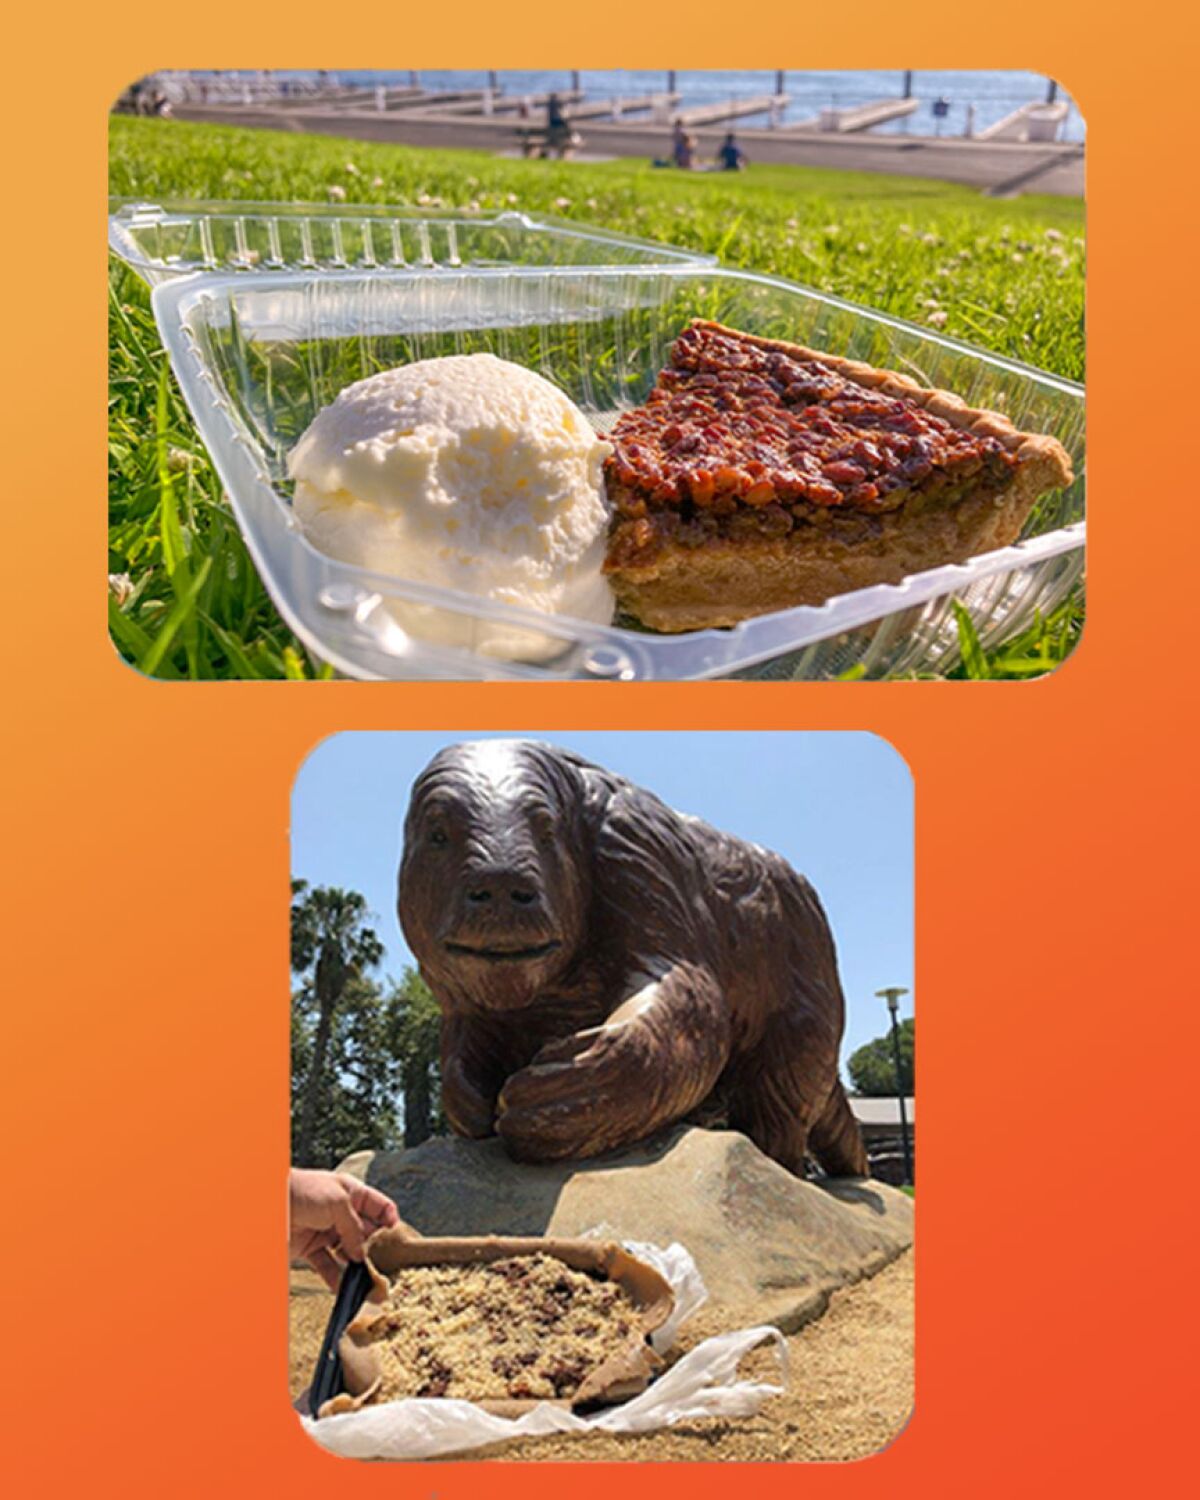 A piece of sweet potato pecan pie at Burton Chace Park and an  Ethiopian dish at La Brea tar pits